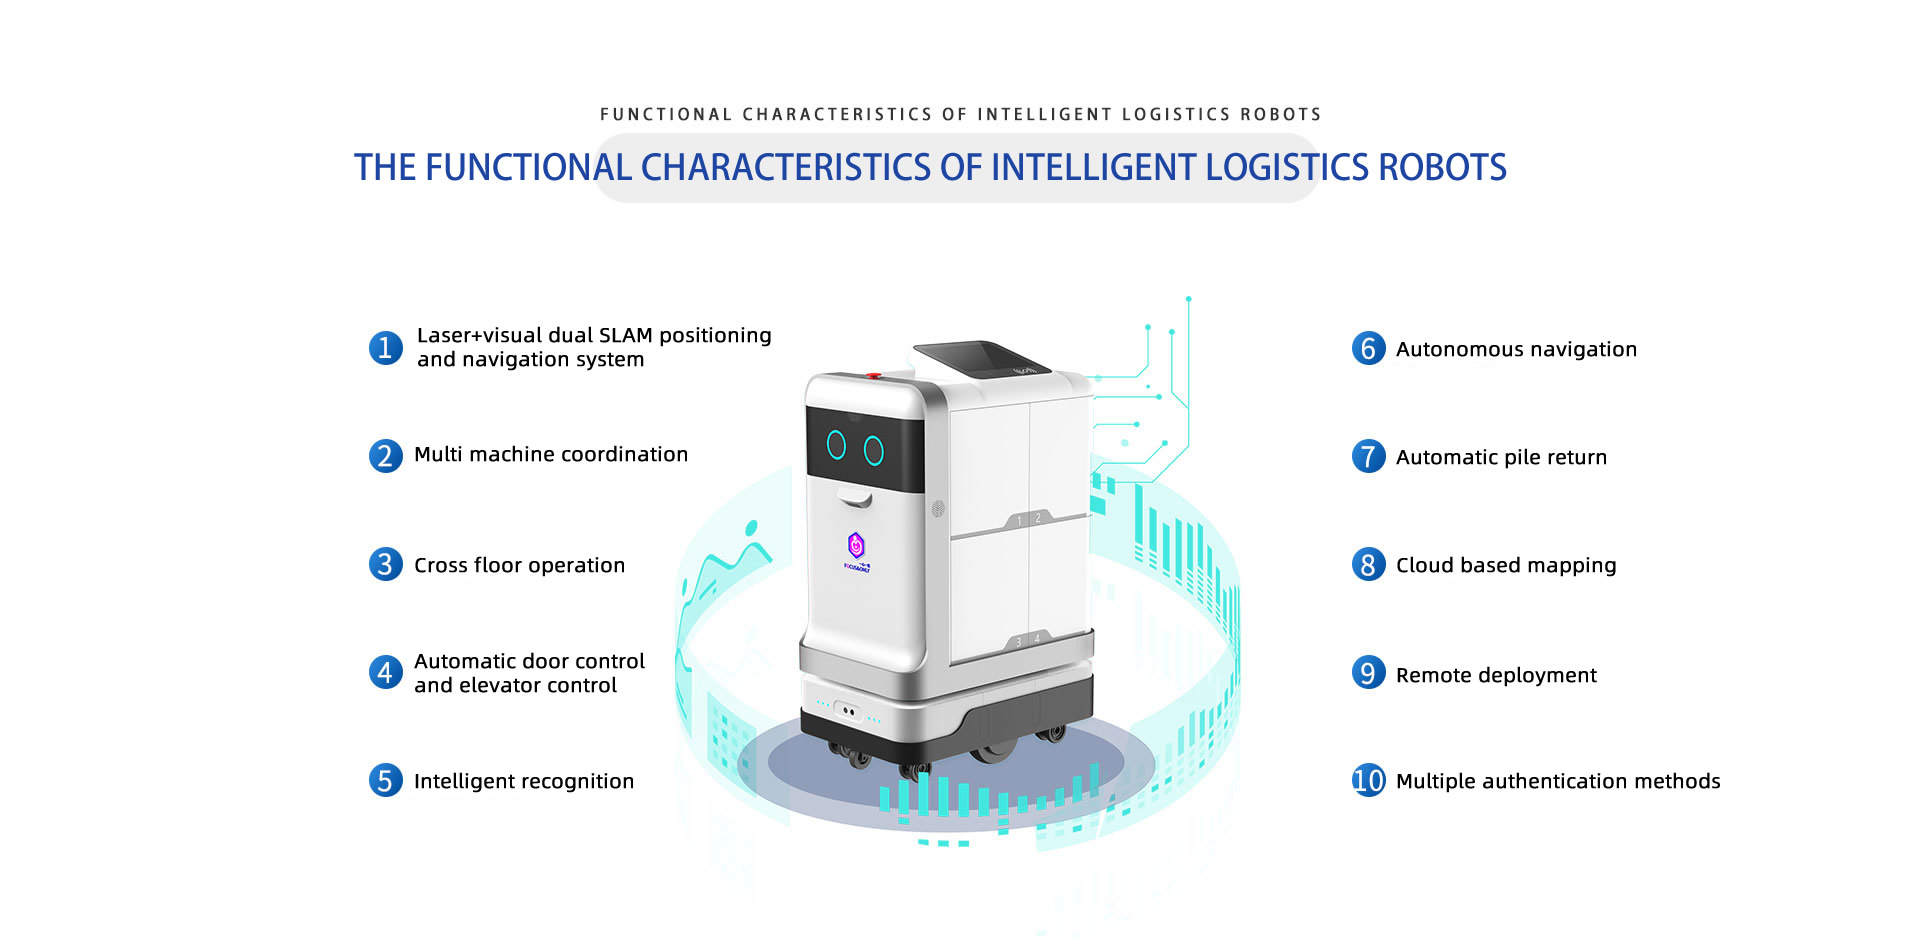 THE FUNCTIONAL CHARACTERISTICS OF INTELLIGENT LOGISTICS ROBOTS: 1.Laser+visual dual SLAM positioning and navigation system; 2.Multi machine coordination; 3.Cross floor operation; 4.Automatic door control and elevator control; 5.Intelligent recognition; 6.Autonomous navigation; 7.Automatic pile return; 8.Cloud based mapping; 9.Remote deployment; 10.Multiple authentication methods.